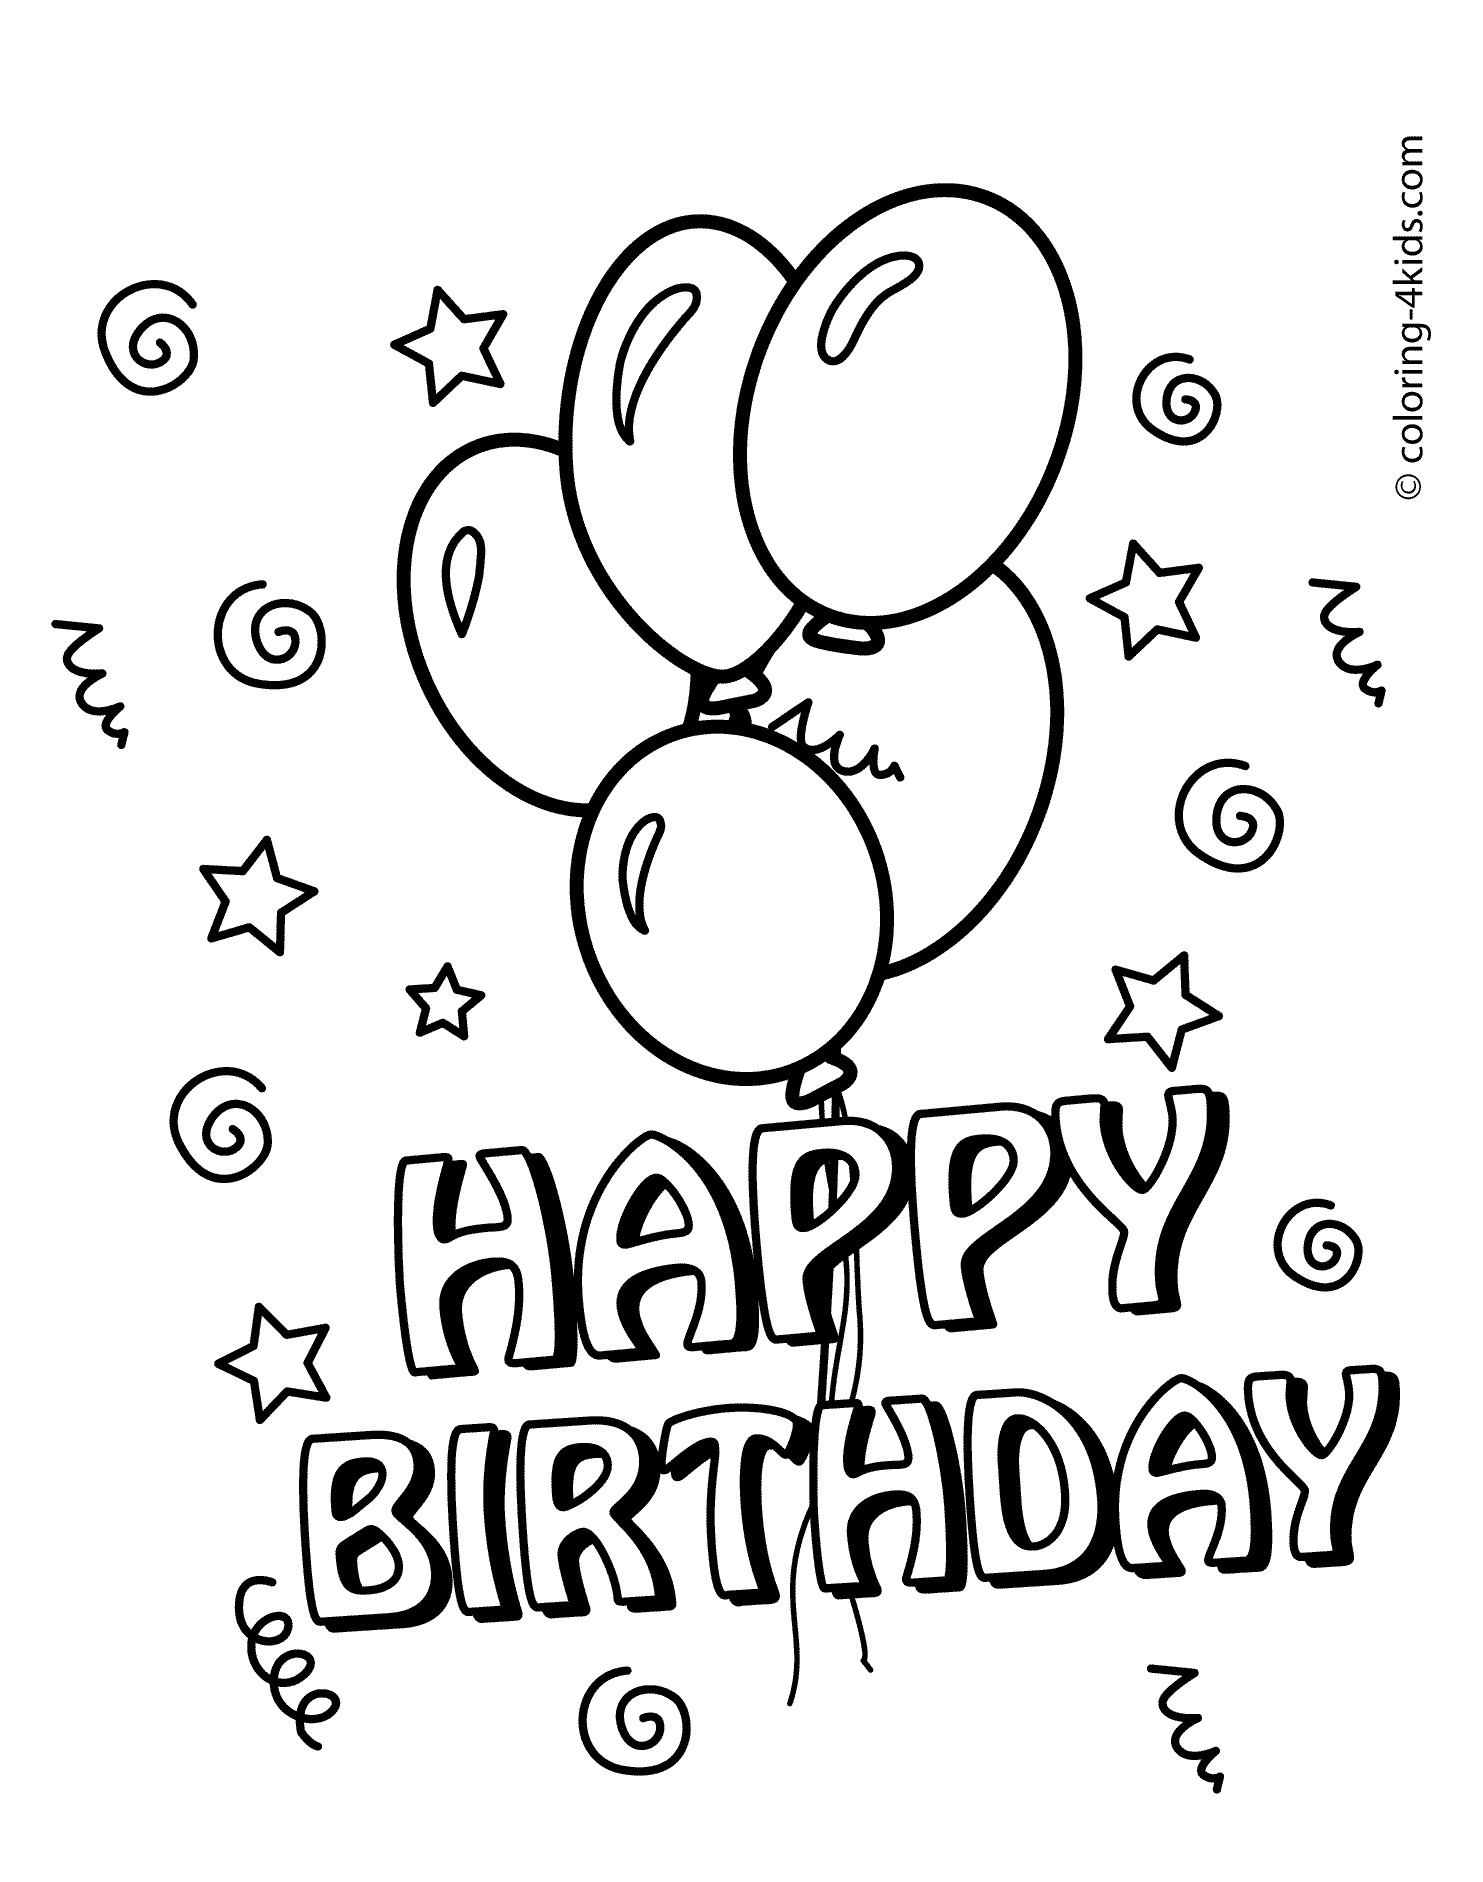 Happy Birthday Coloring Pages For Kids
 Happy birthday coloring pages with balloons for kids